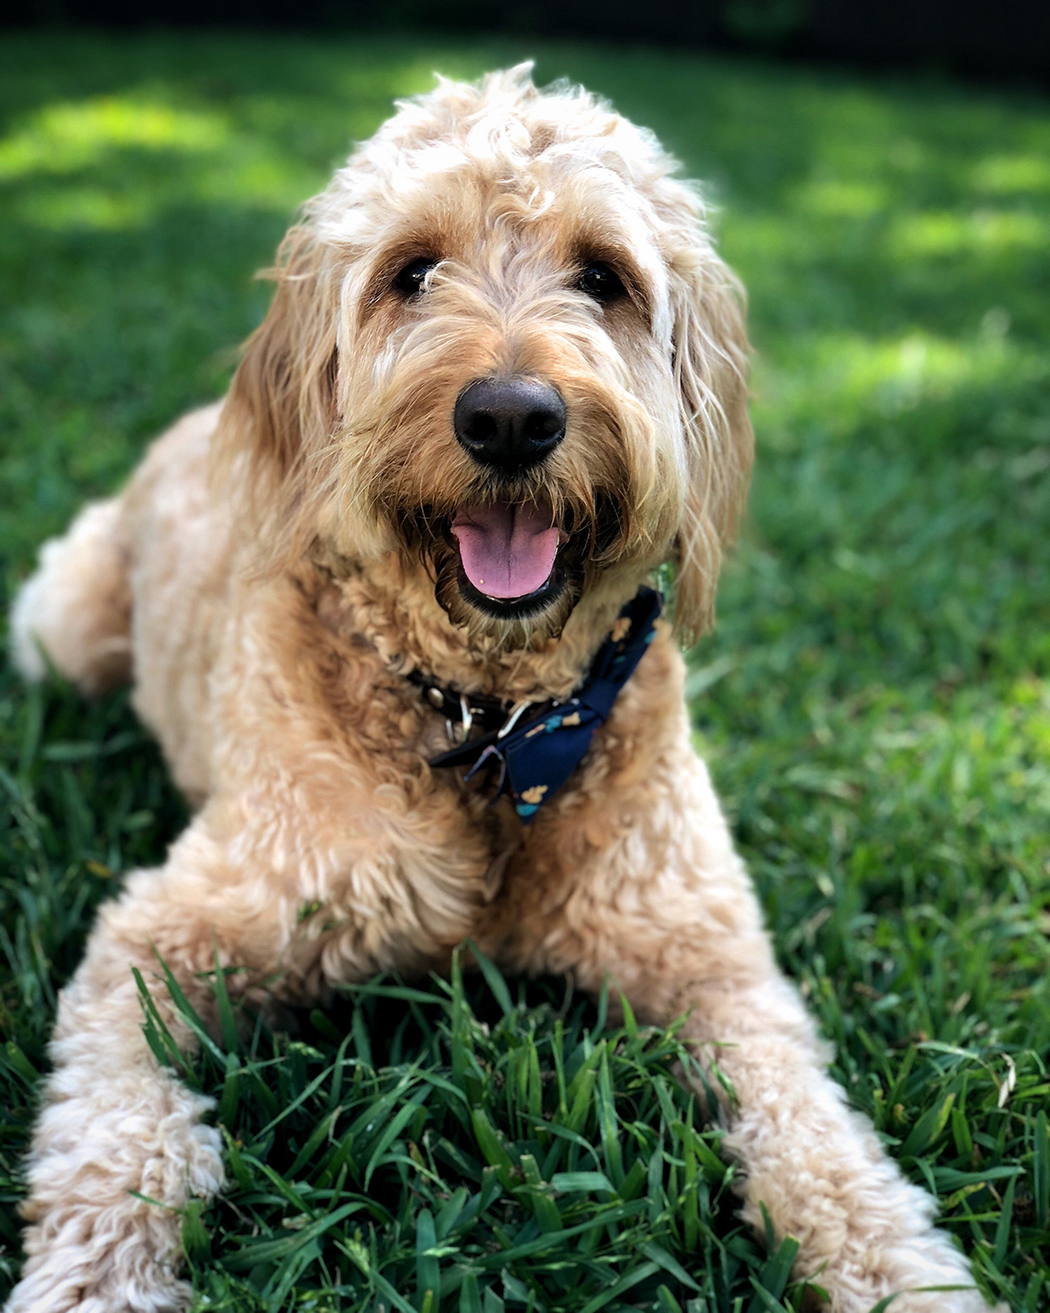 Mambo is a three-year-old Goldendoodle 